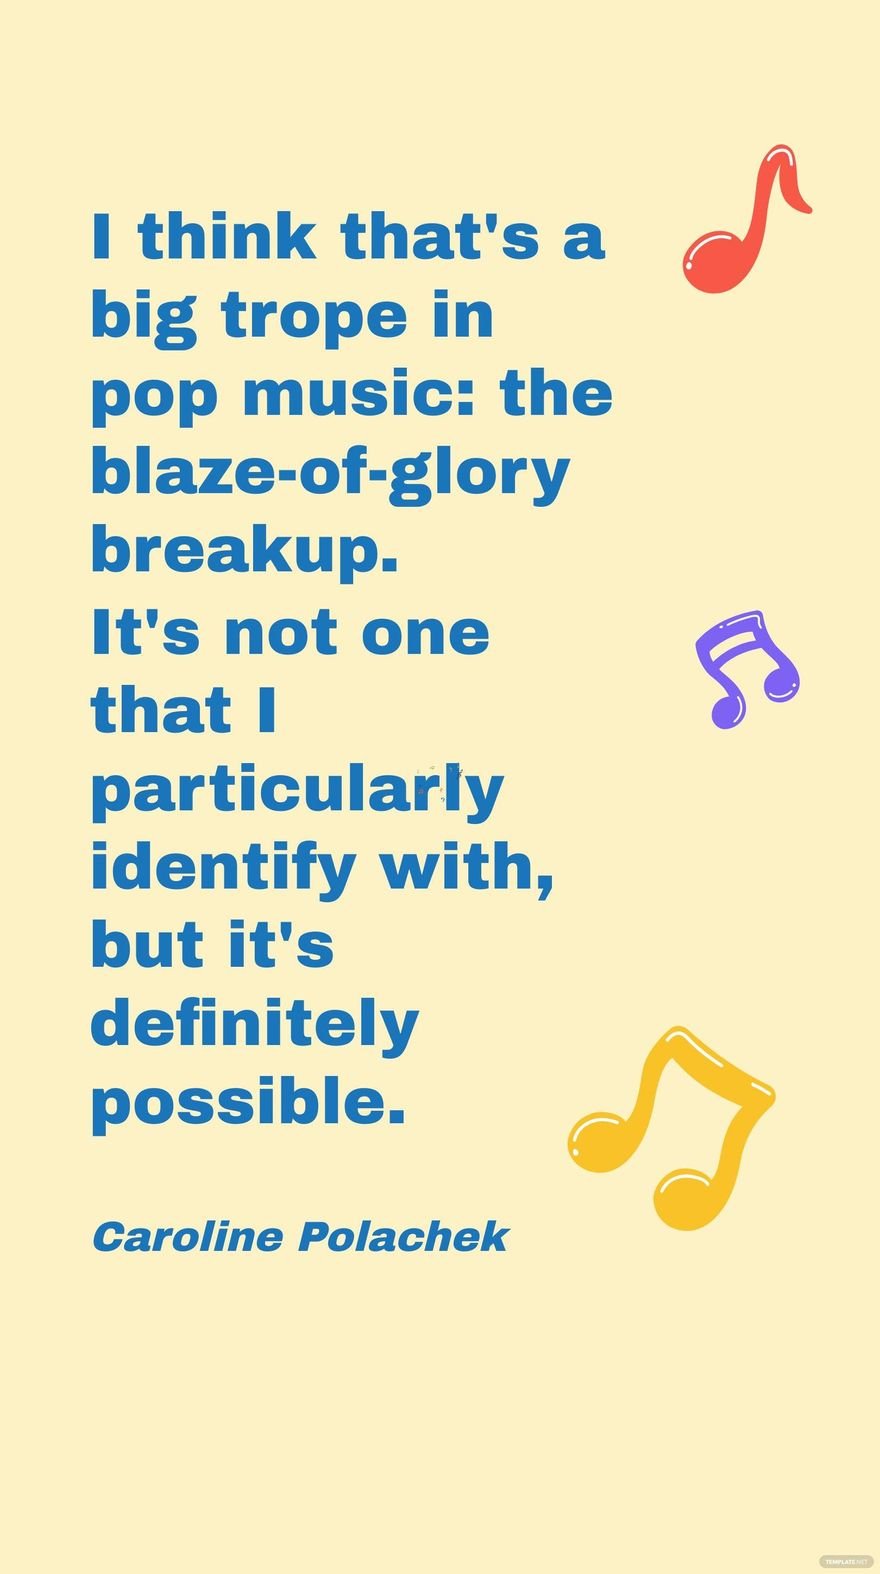 Caroline Polachek - I think that's a big trope in pop music: the blaze-of-glory breakup. It's not one that I particularly identify with, but it's definitely possible.